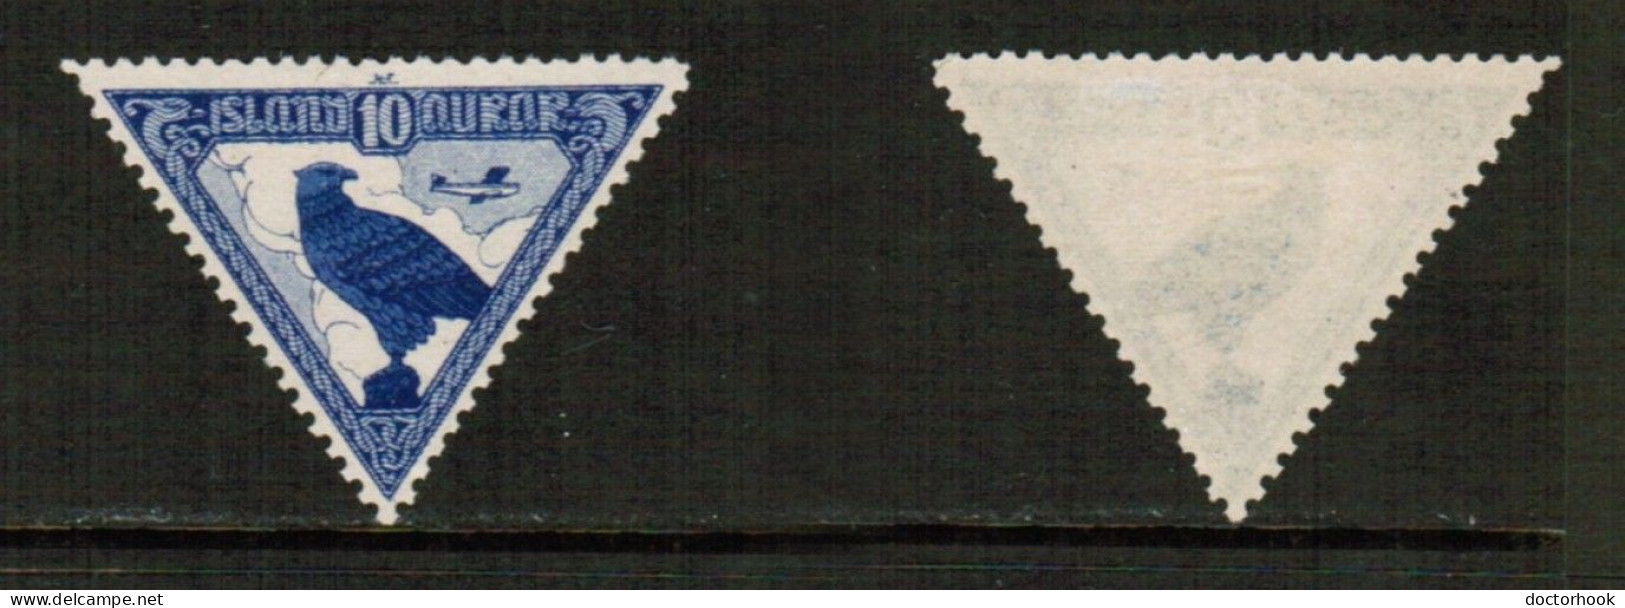 ICELAND   Scott # C 3* MINT HINGED (CONDITION AS PER SCAN) (Stamp Scan # 915-5) - Luchtpost